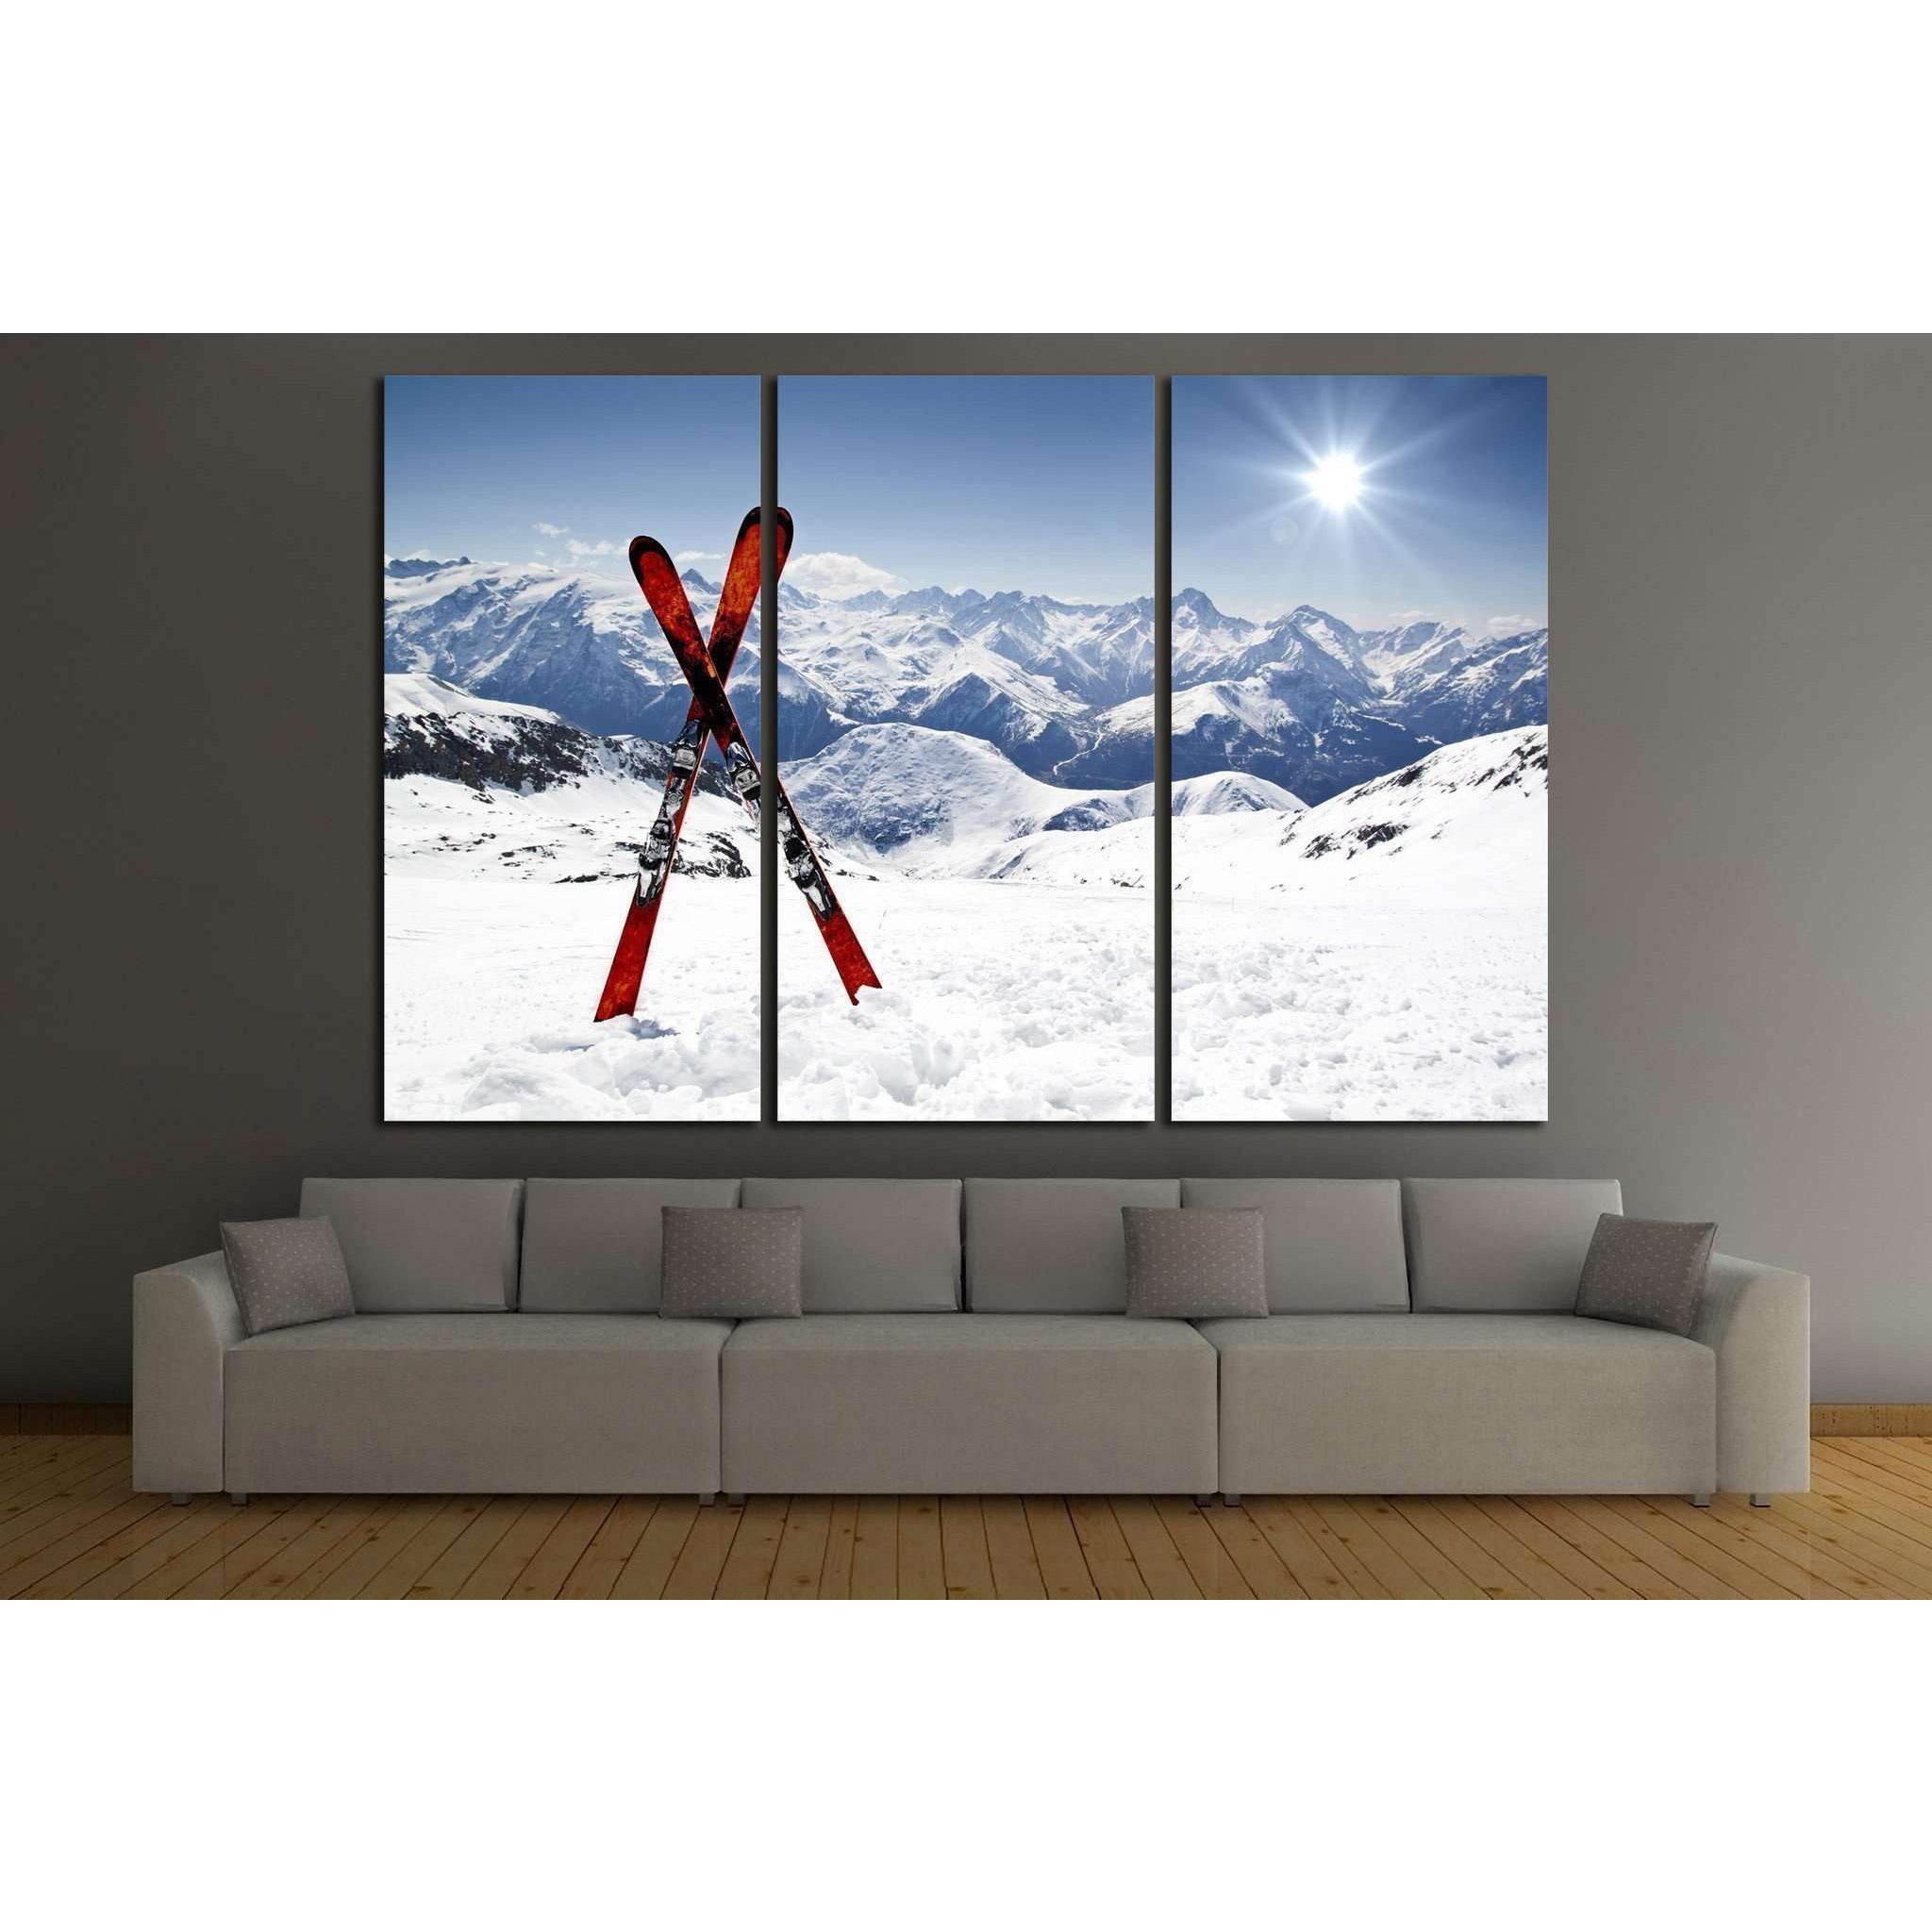 Skis in Snow №183 Ready to Hang Canvas Print